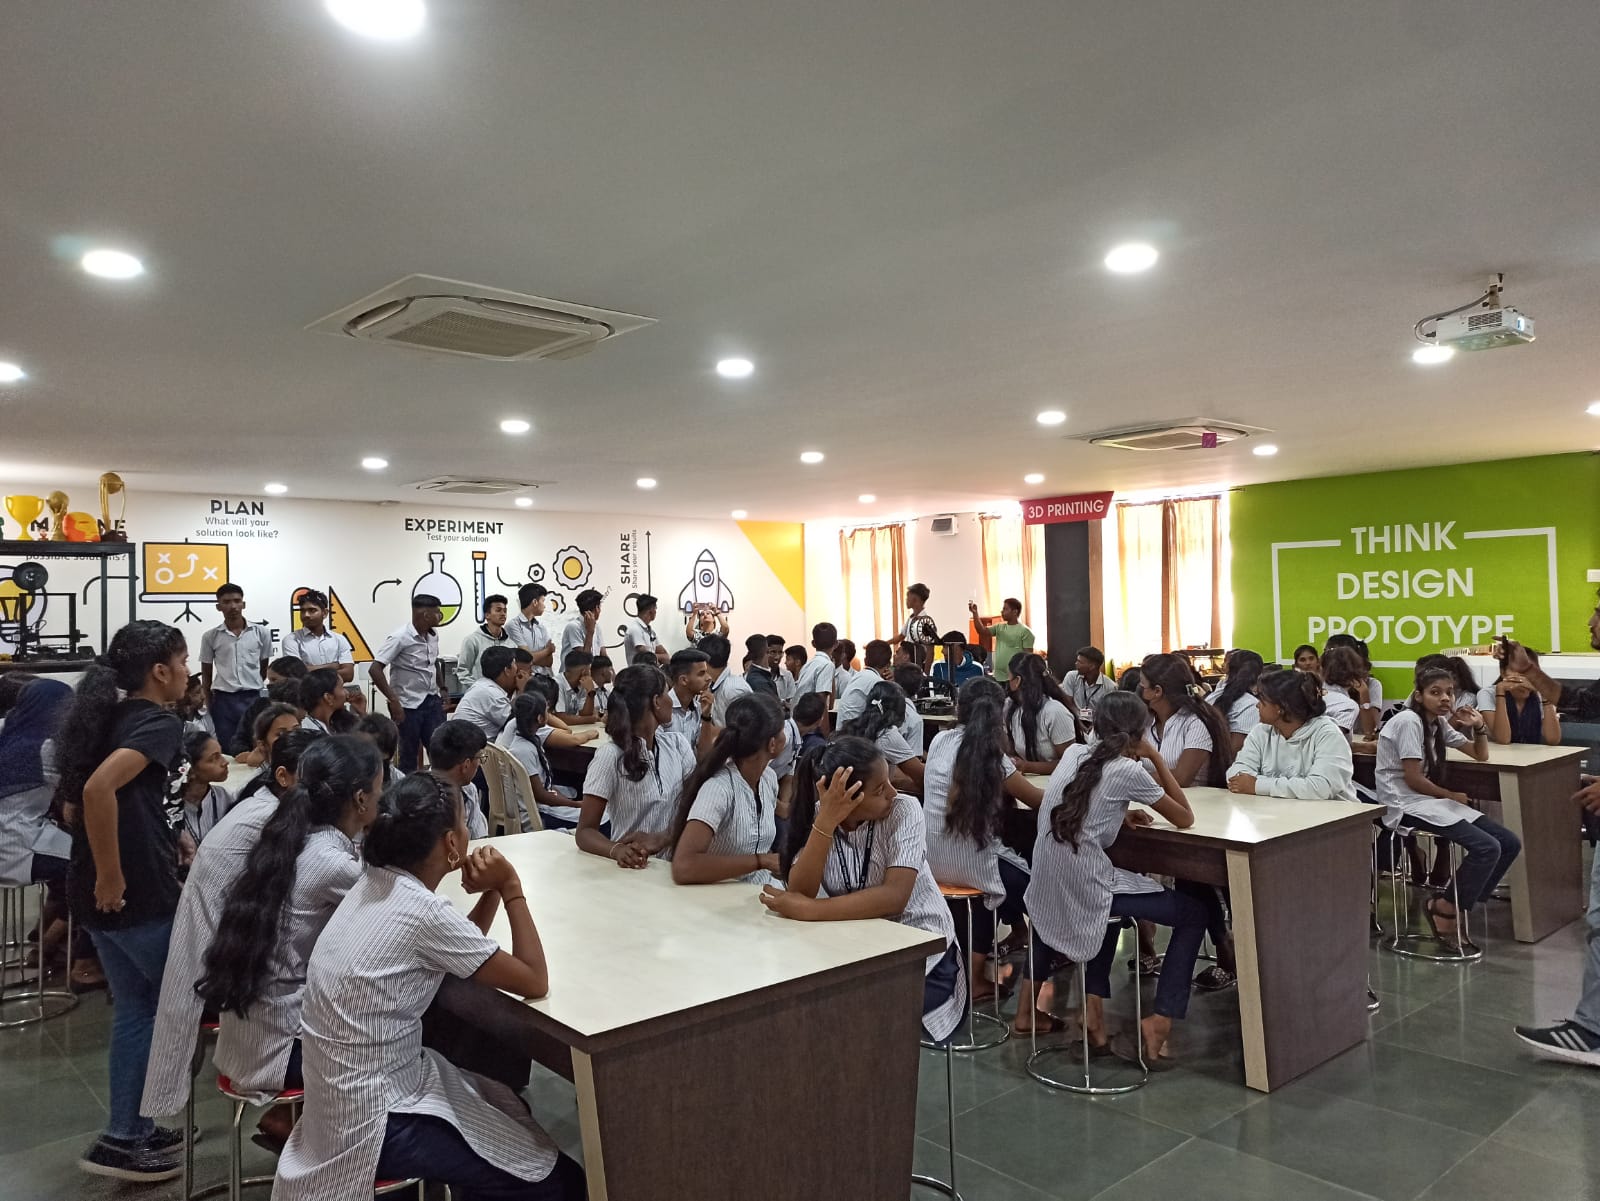 Think Design and Prototyping Workshop for the Students of St. Michael Higher Secondary School, Taleigao-Goa.